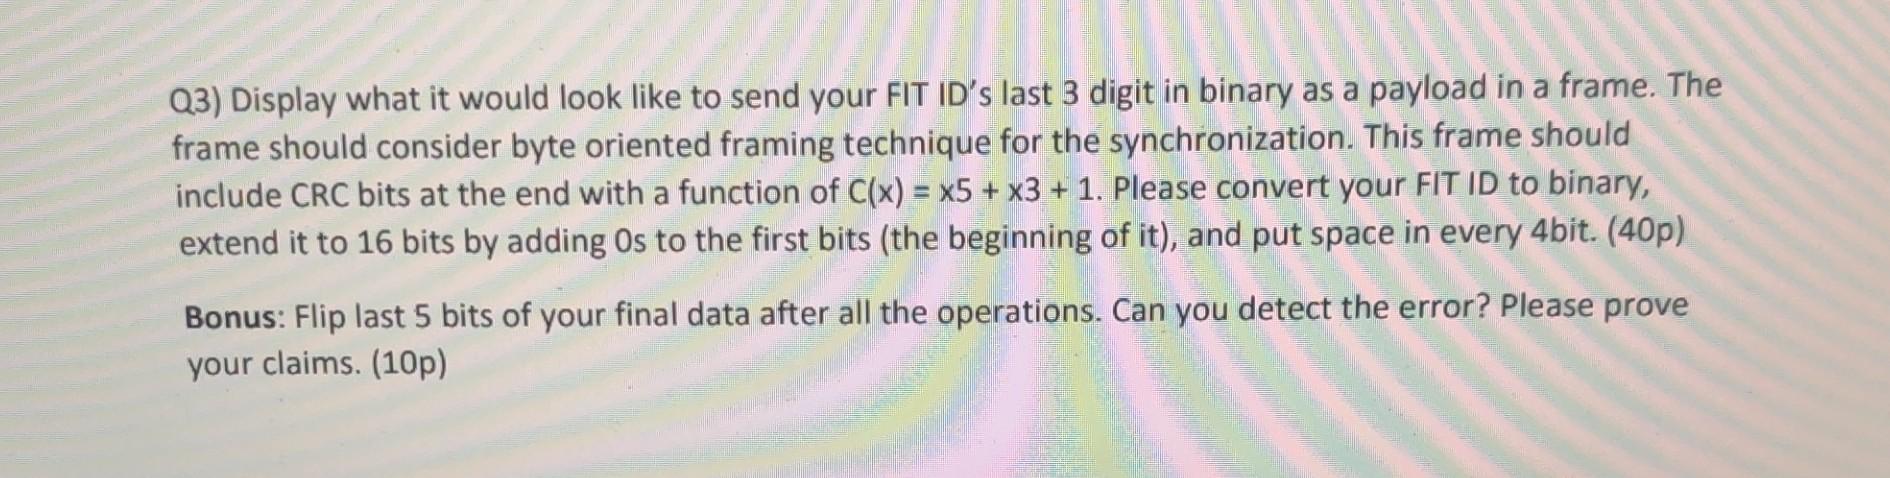 Q3) Display what it would look like to send your FIT ID's last 3 digit in binary as a payload in a frame. The